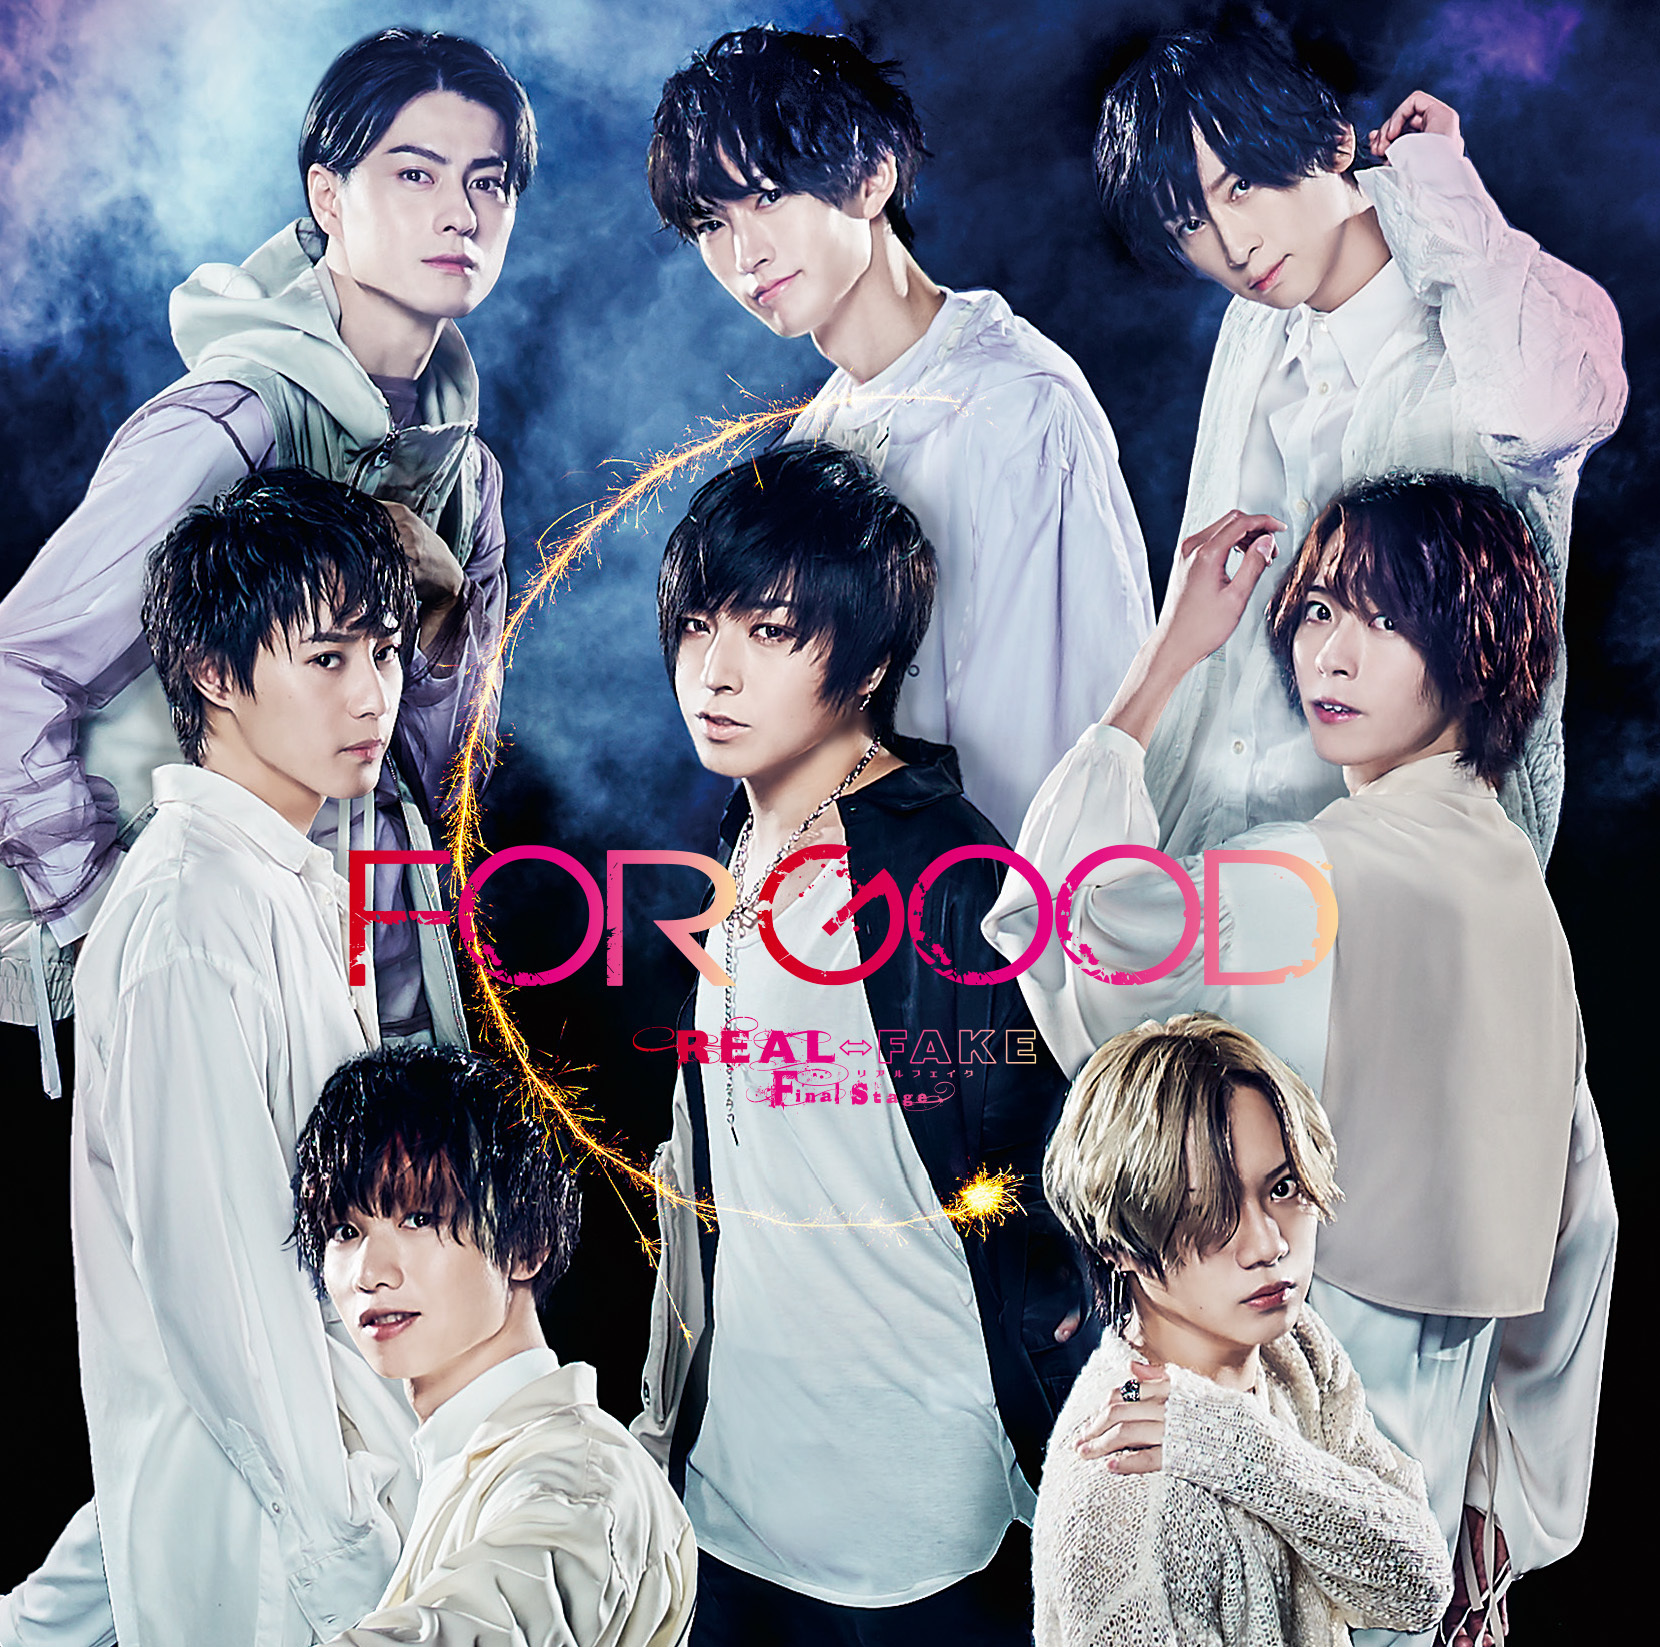 『REAL⇔FAKE Final Stage』Music CDアルバム『FOR GOOD』通常盤 　　　(C)「REAL⇔FAKE」製作委員会・MBS